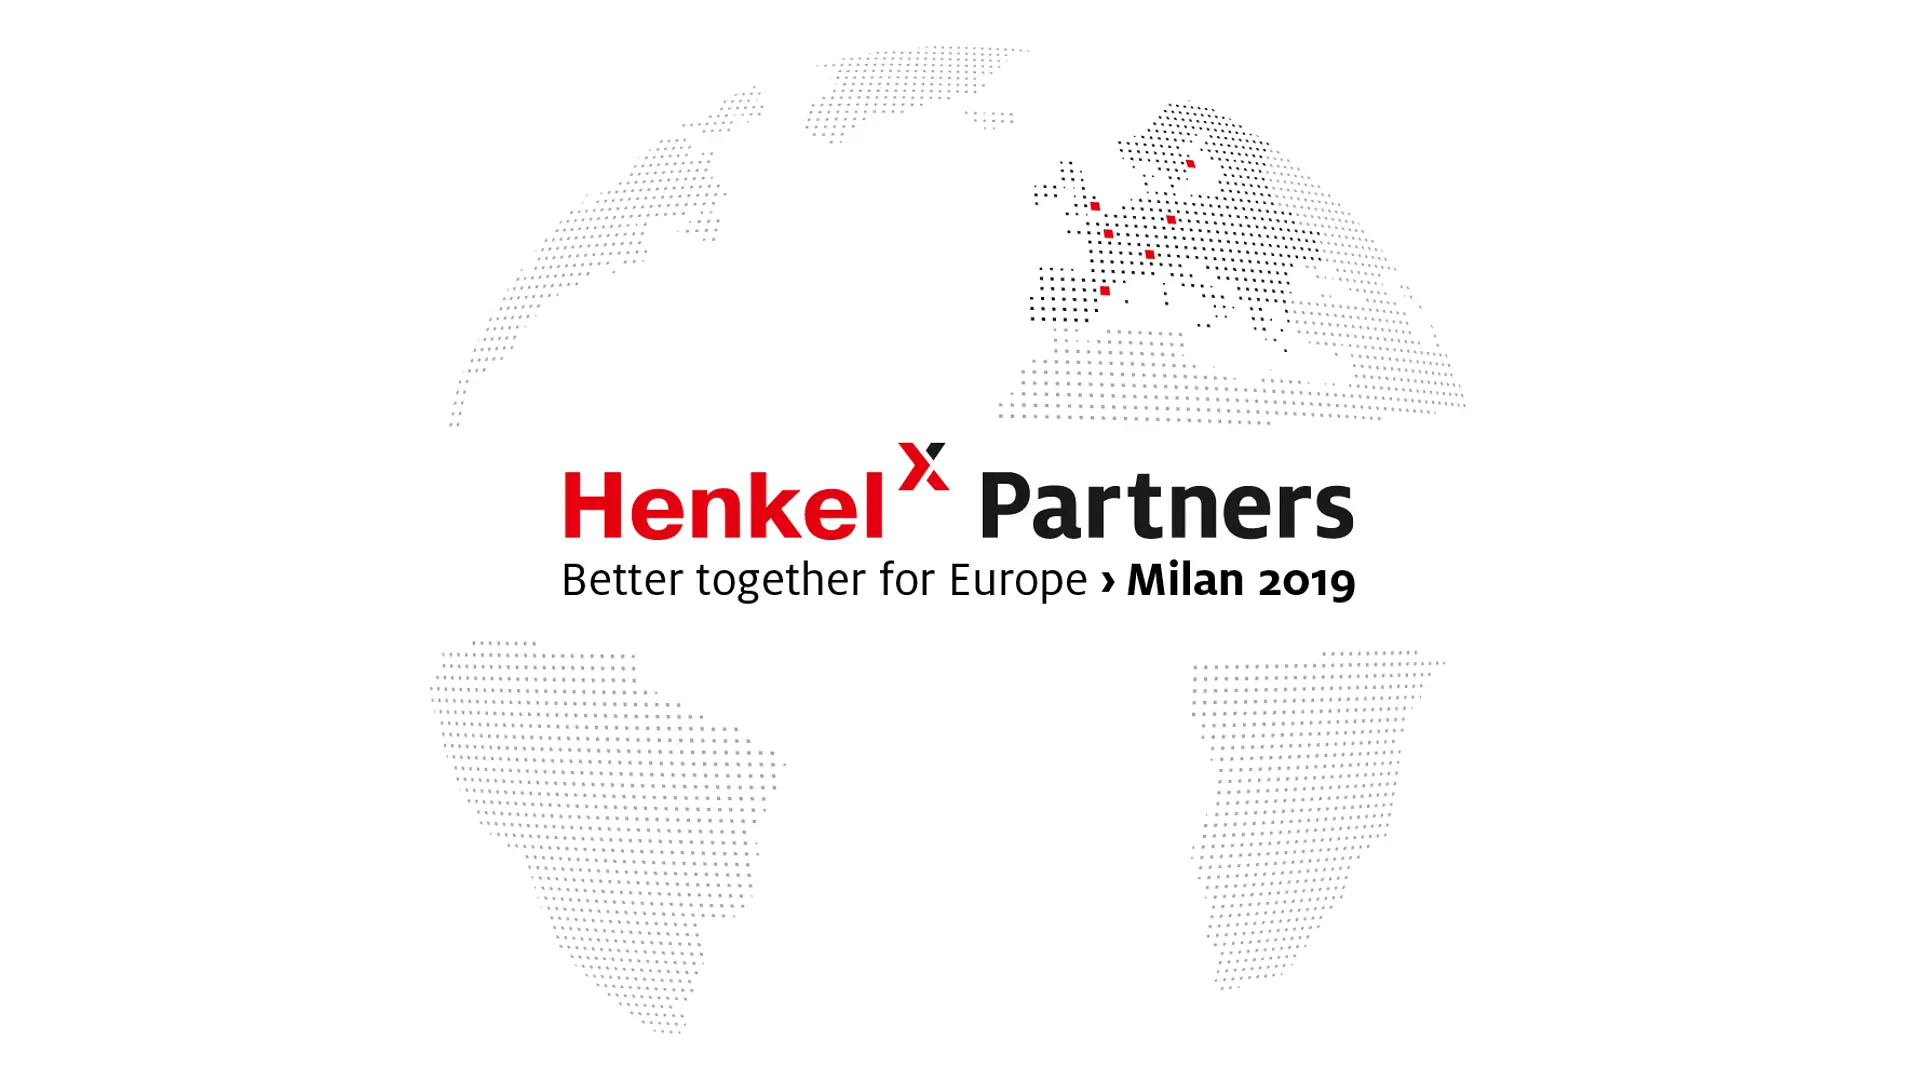 Henkel X Partners motto “Better together for Europe”